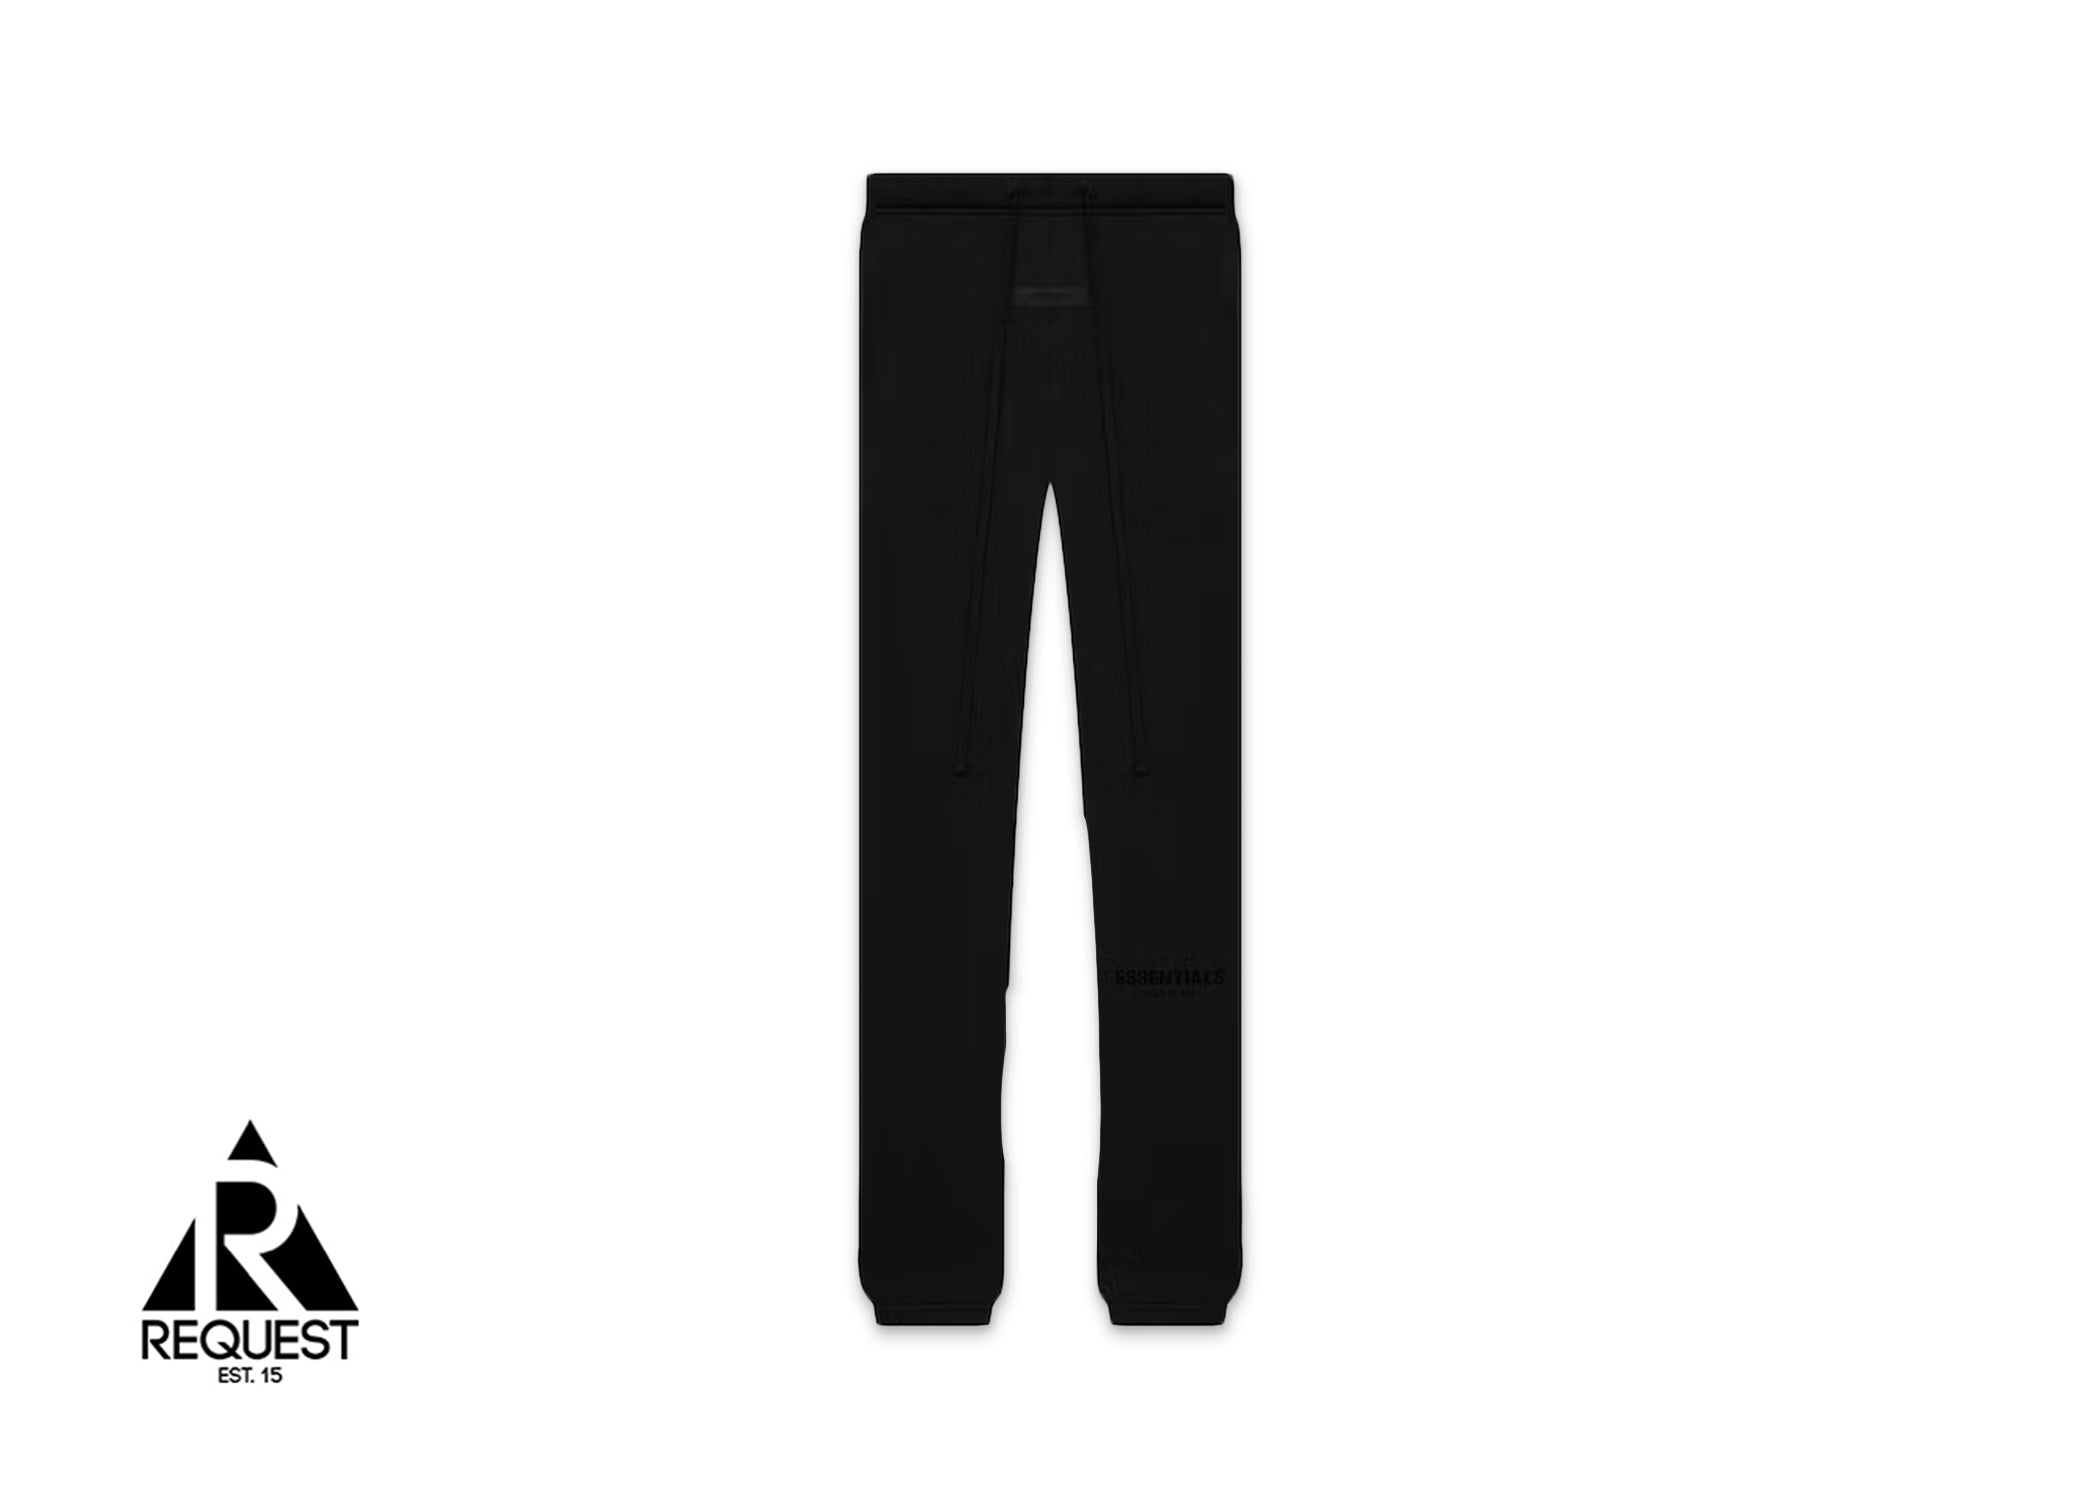 Fear of God Essentials Sweatpants “Stretch Limo”